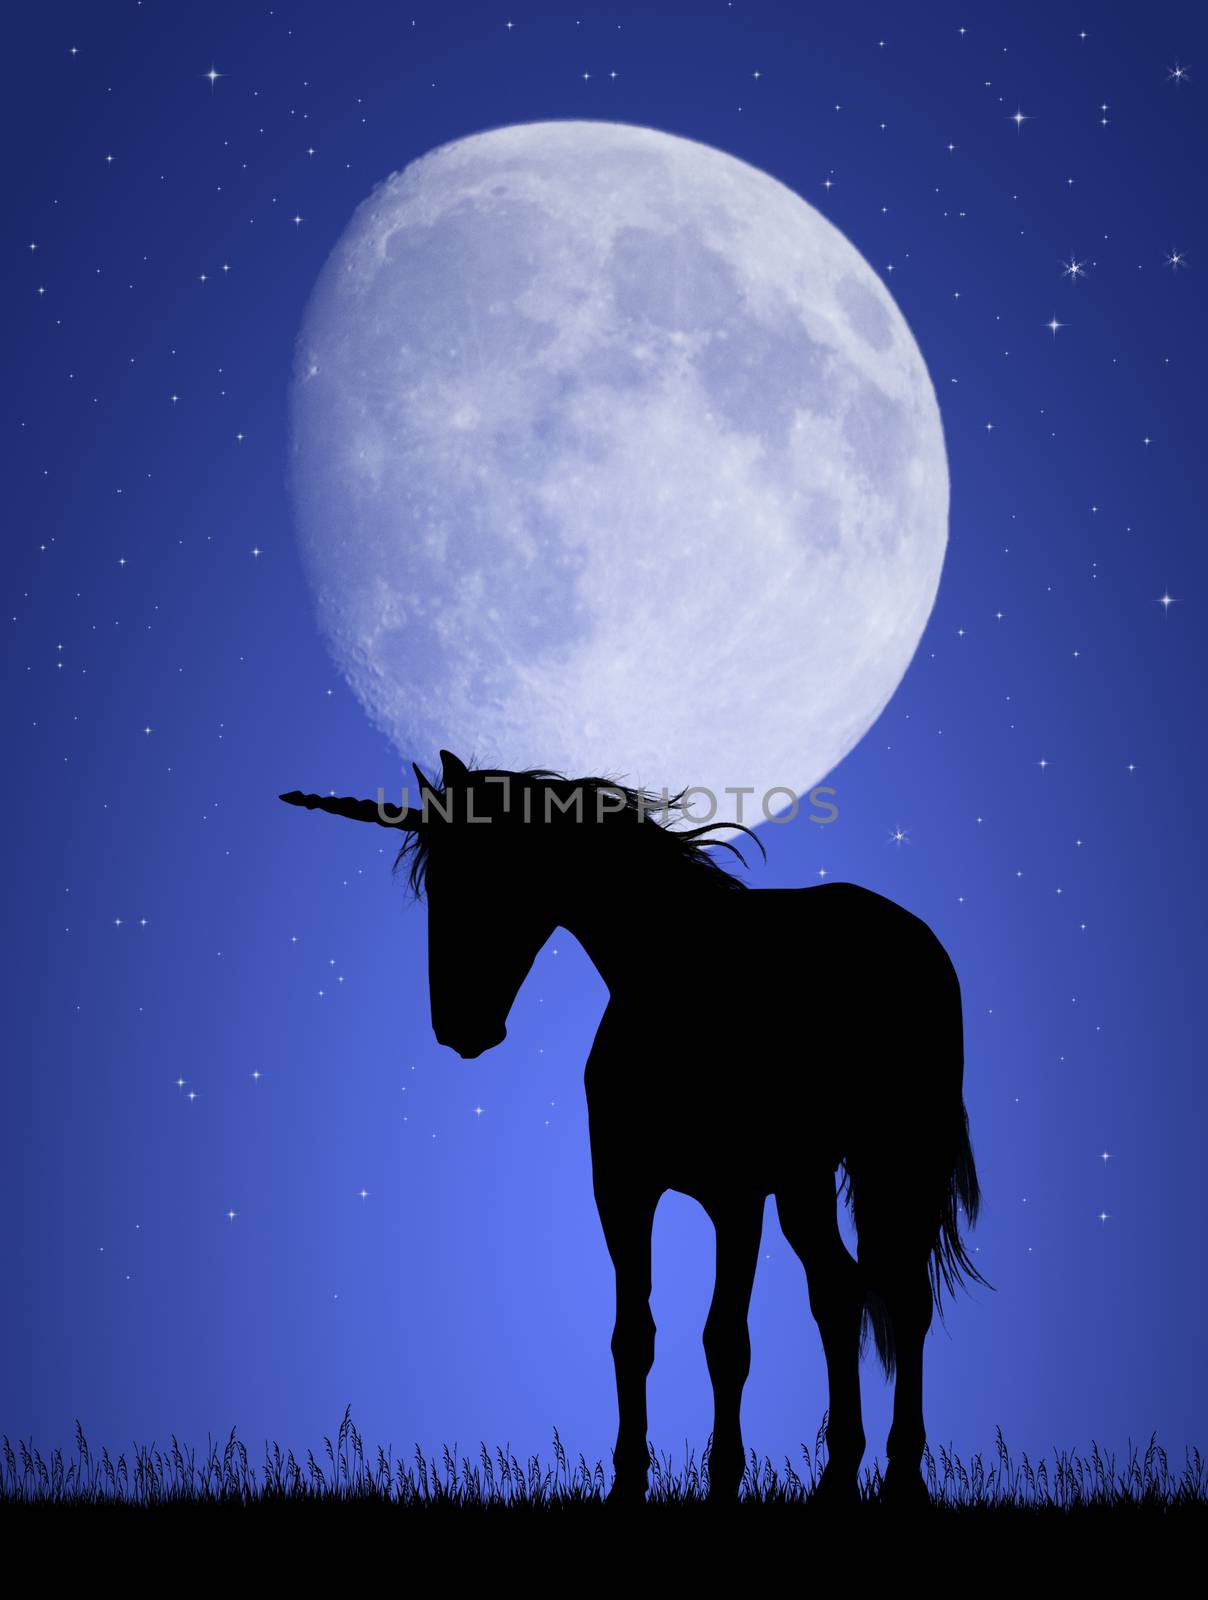 unicorn in the moonlight by adrenalina